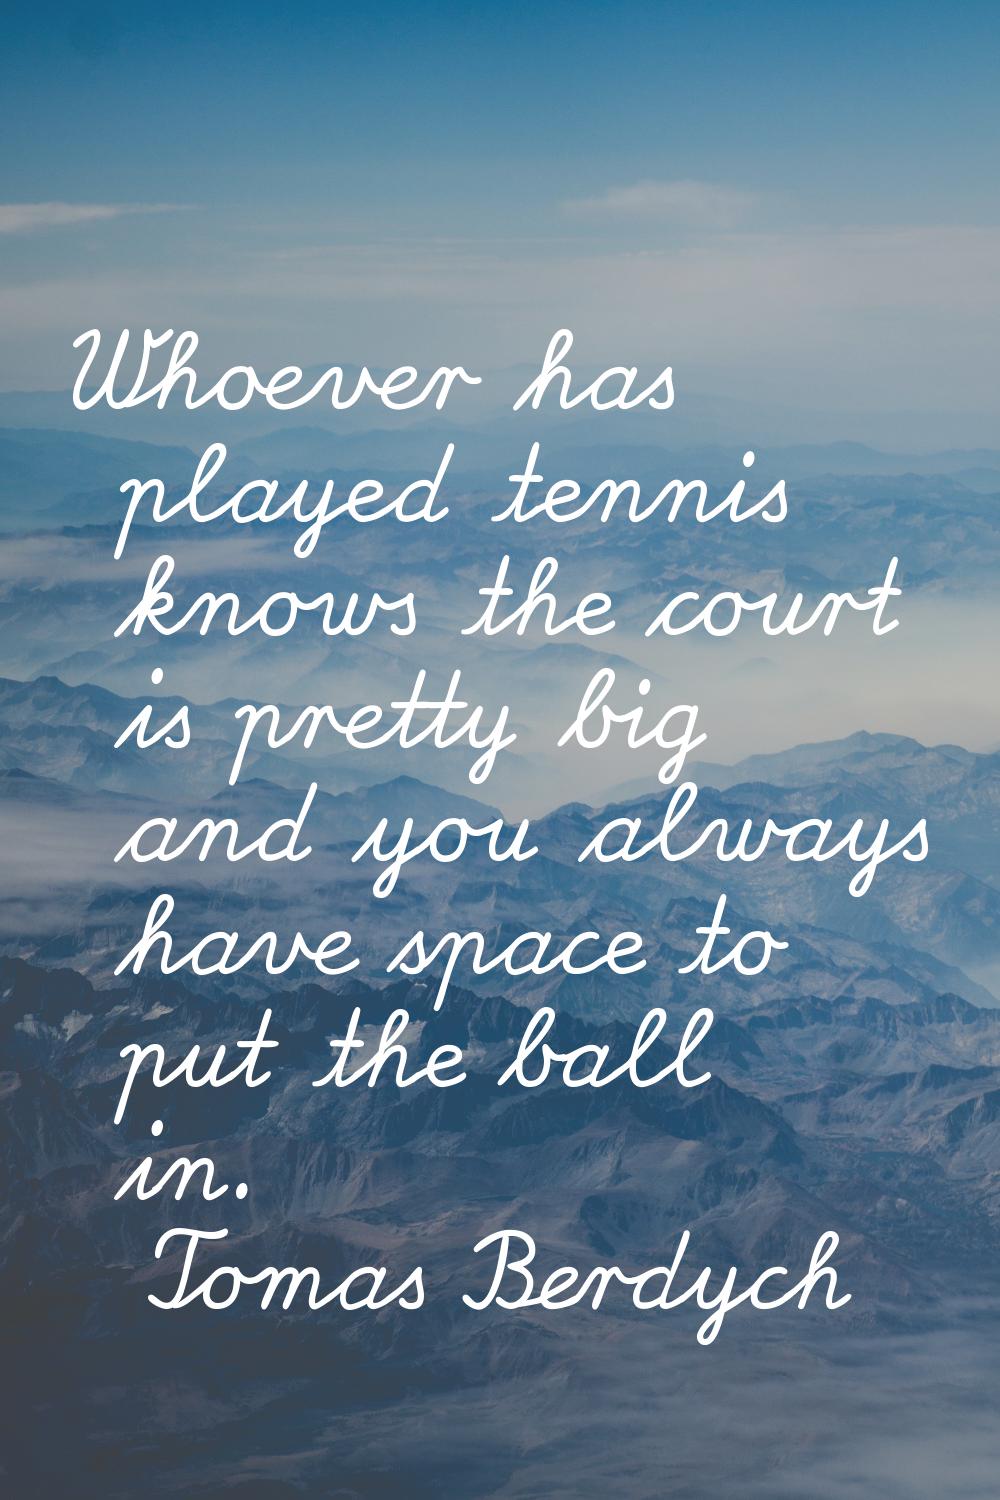 Whoever has played tennis knows the court is pretty big and you always have space to put the ball i